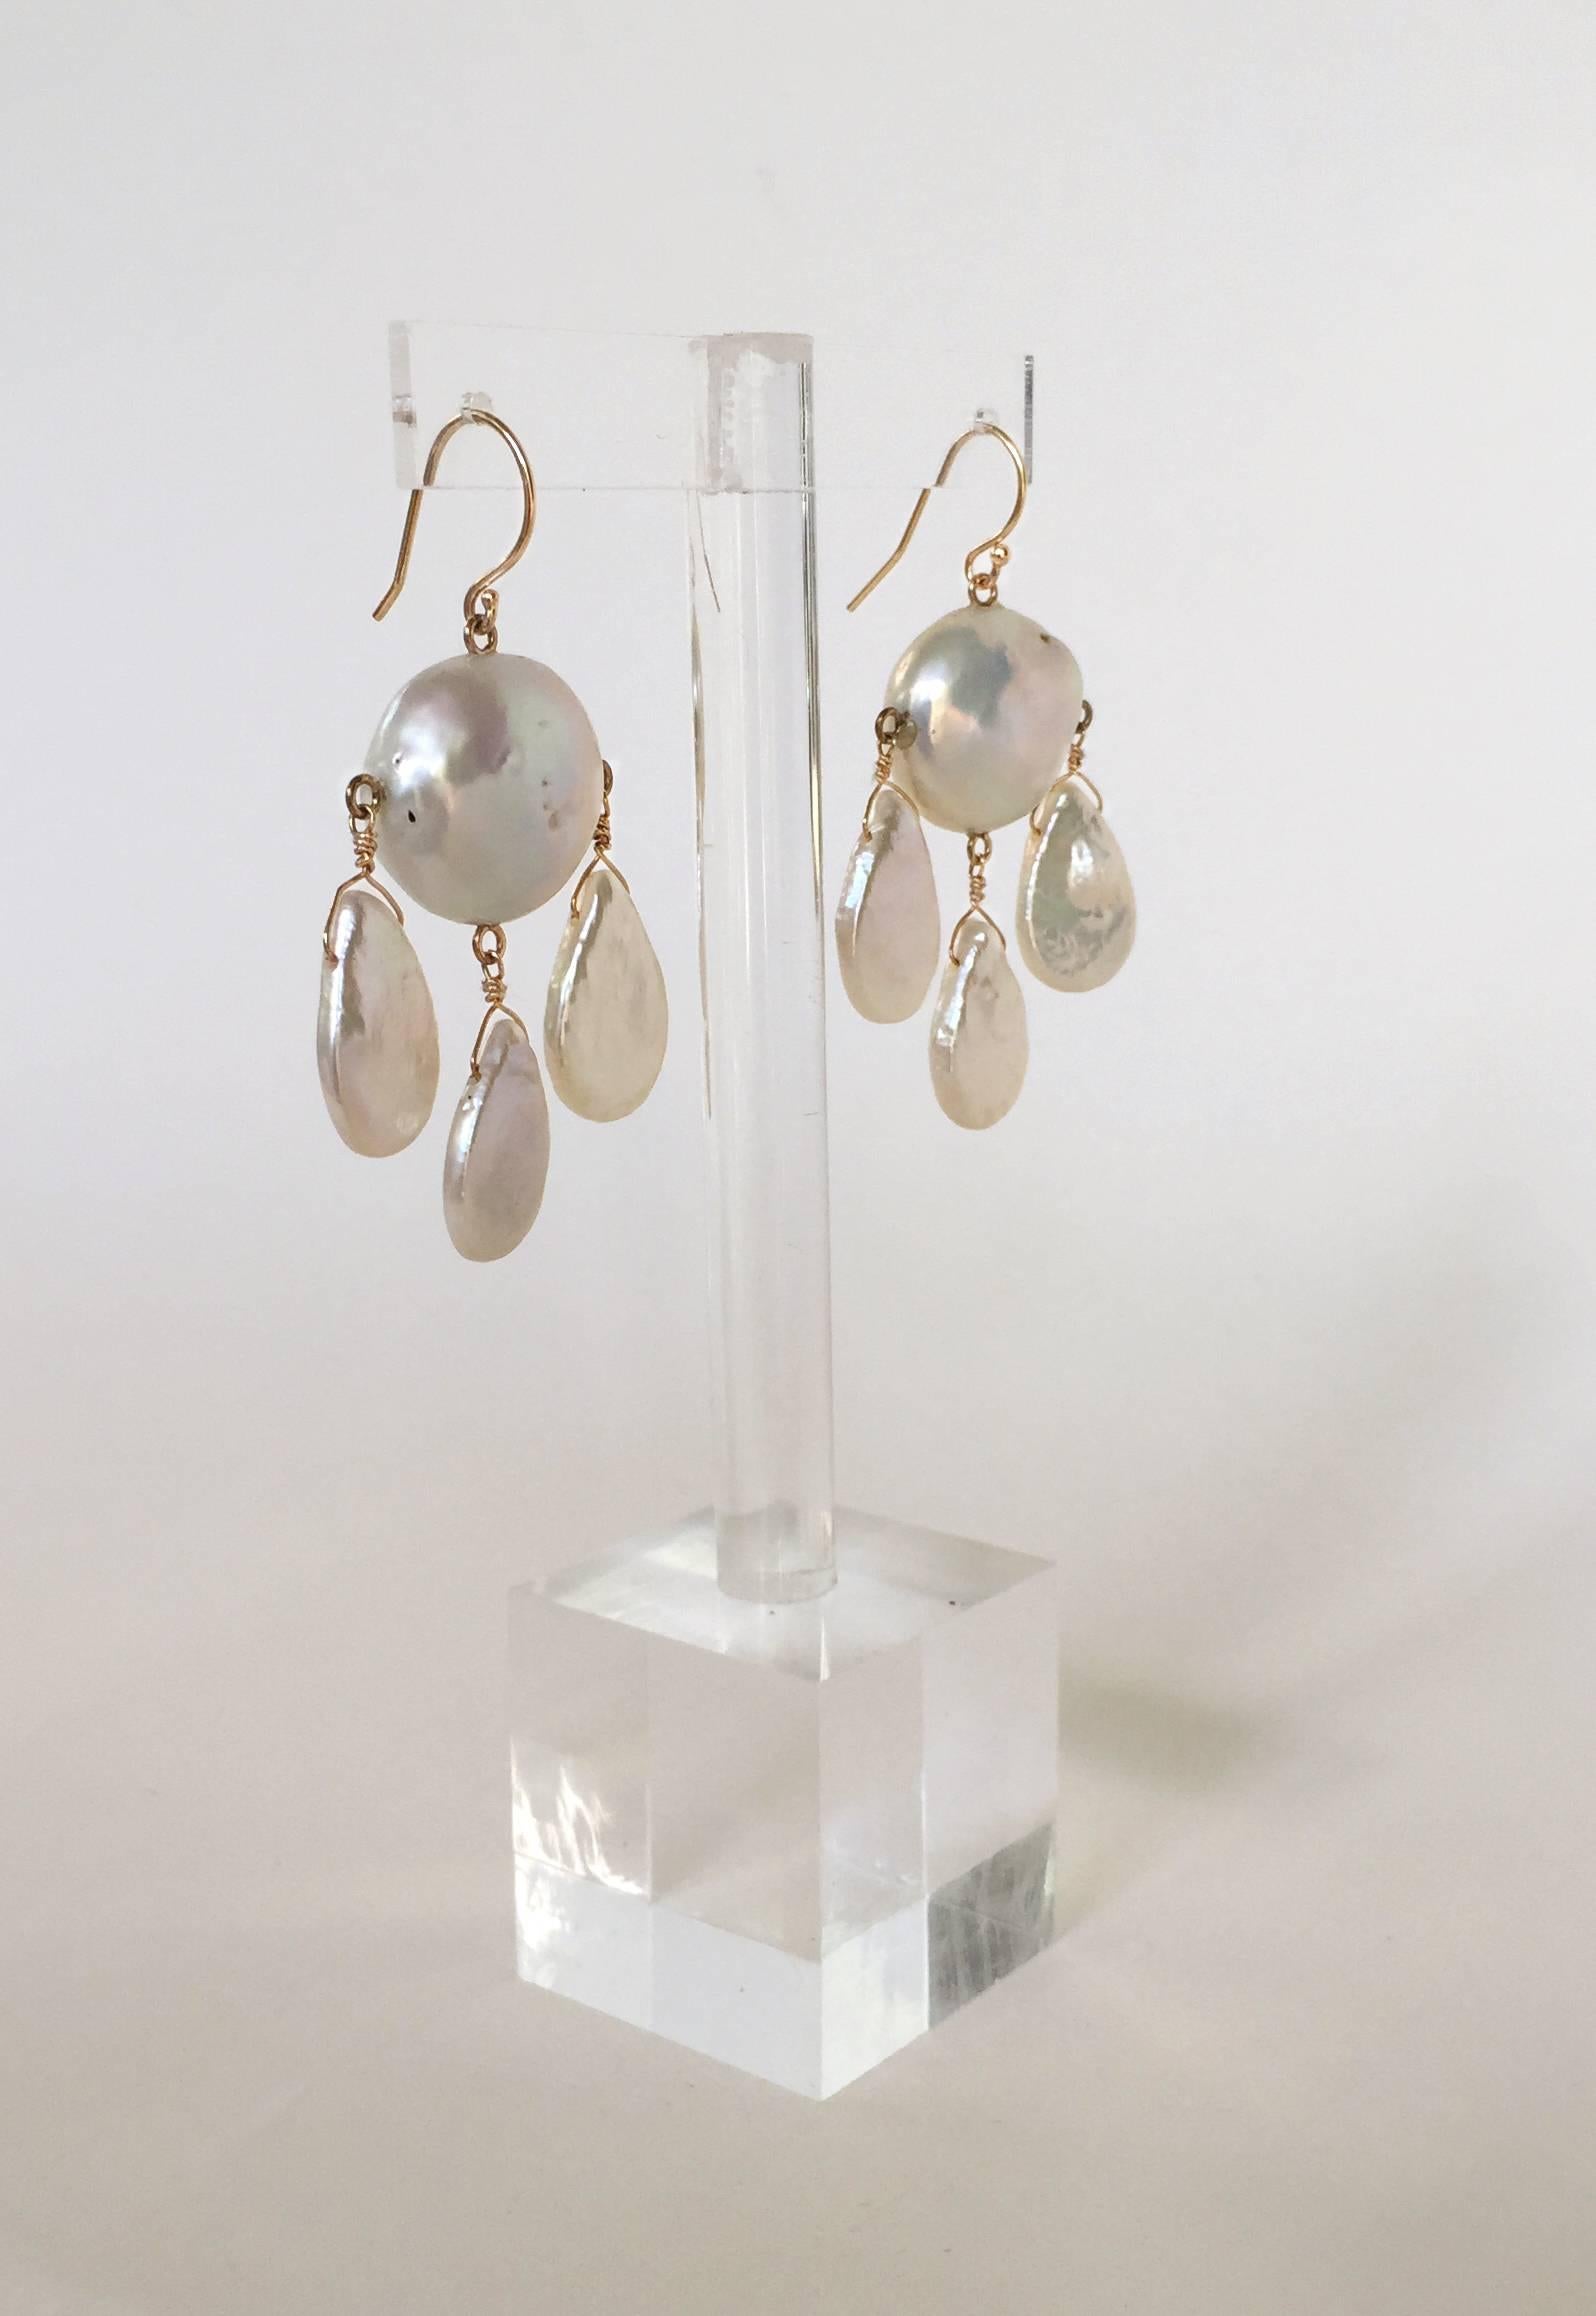 Artist Baroque Pearl Earrings with Three Drop Flat Pearls by Marina J